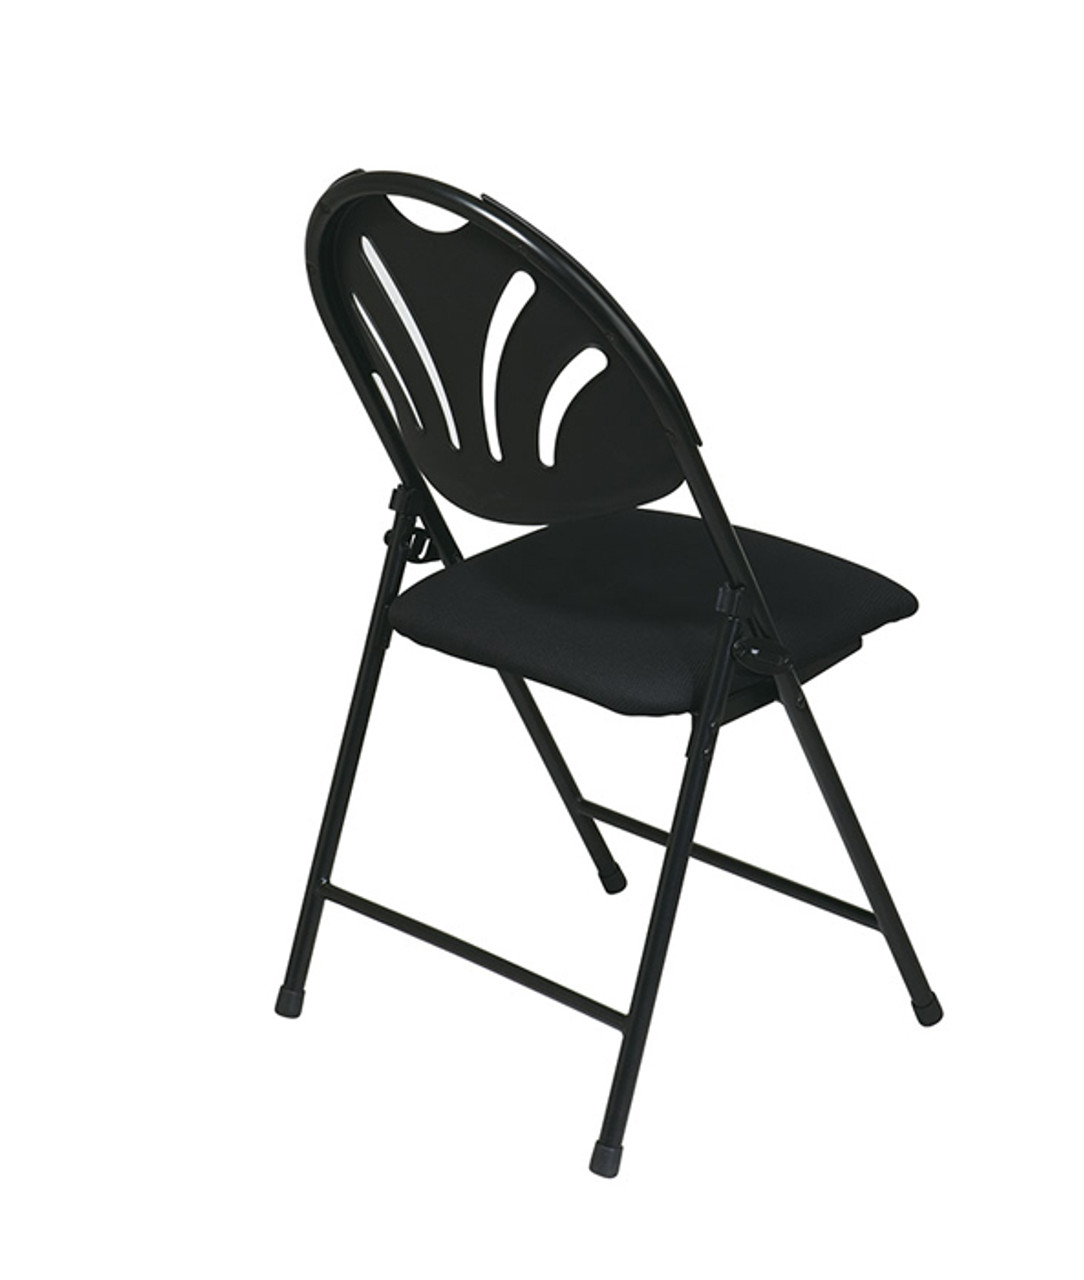 Folding Cushion Chair - 4 Pack - Black, Silver - Work Smart by Office Star Products